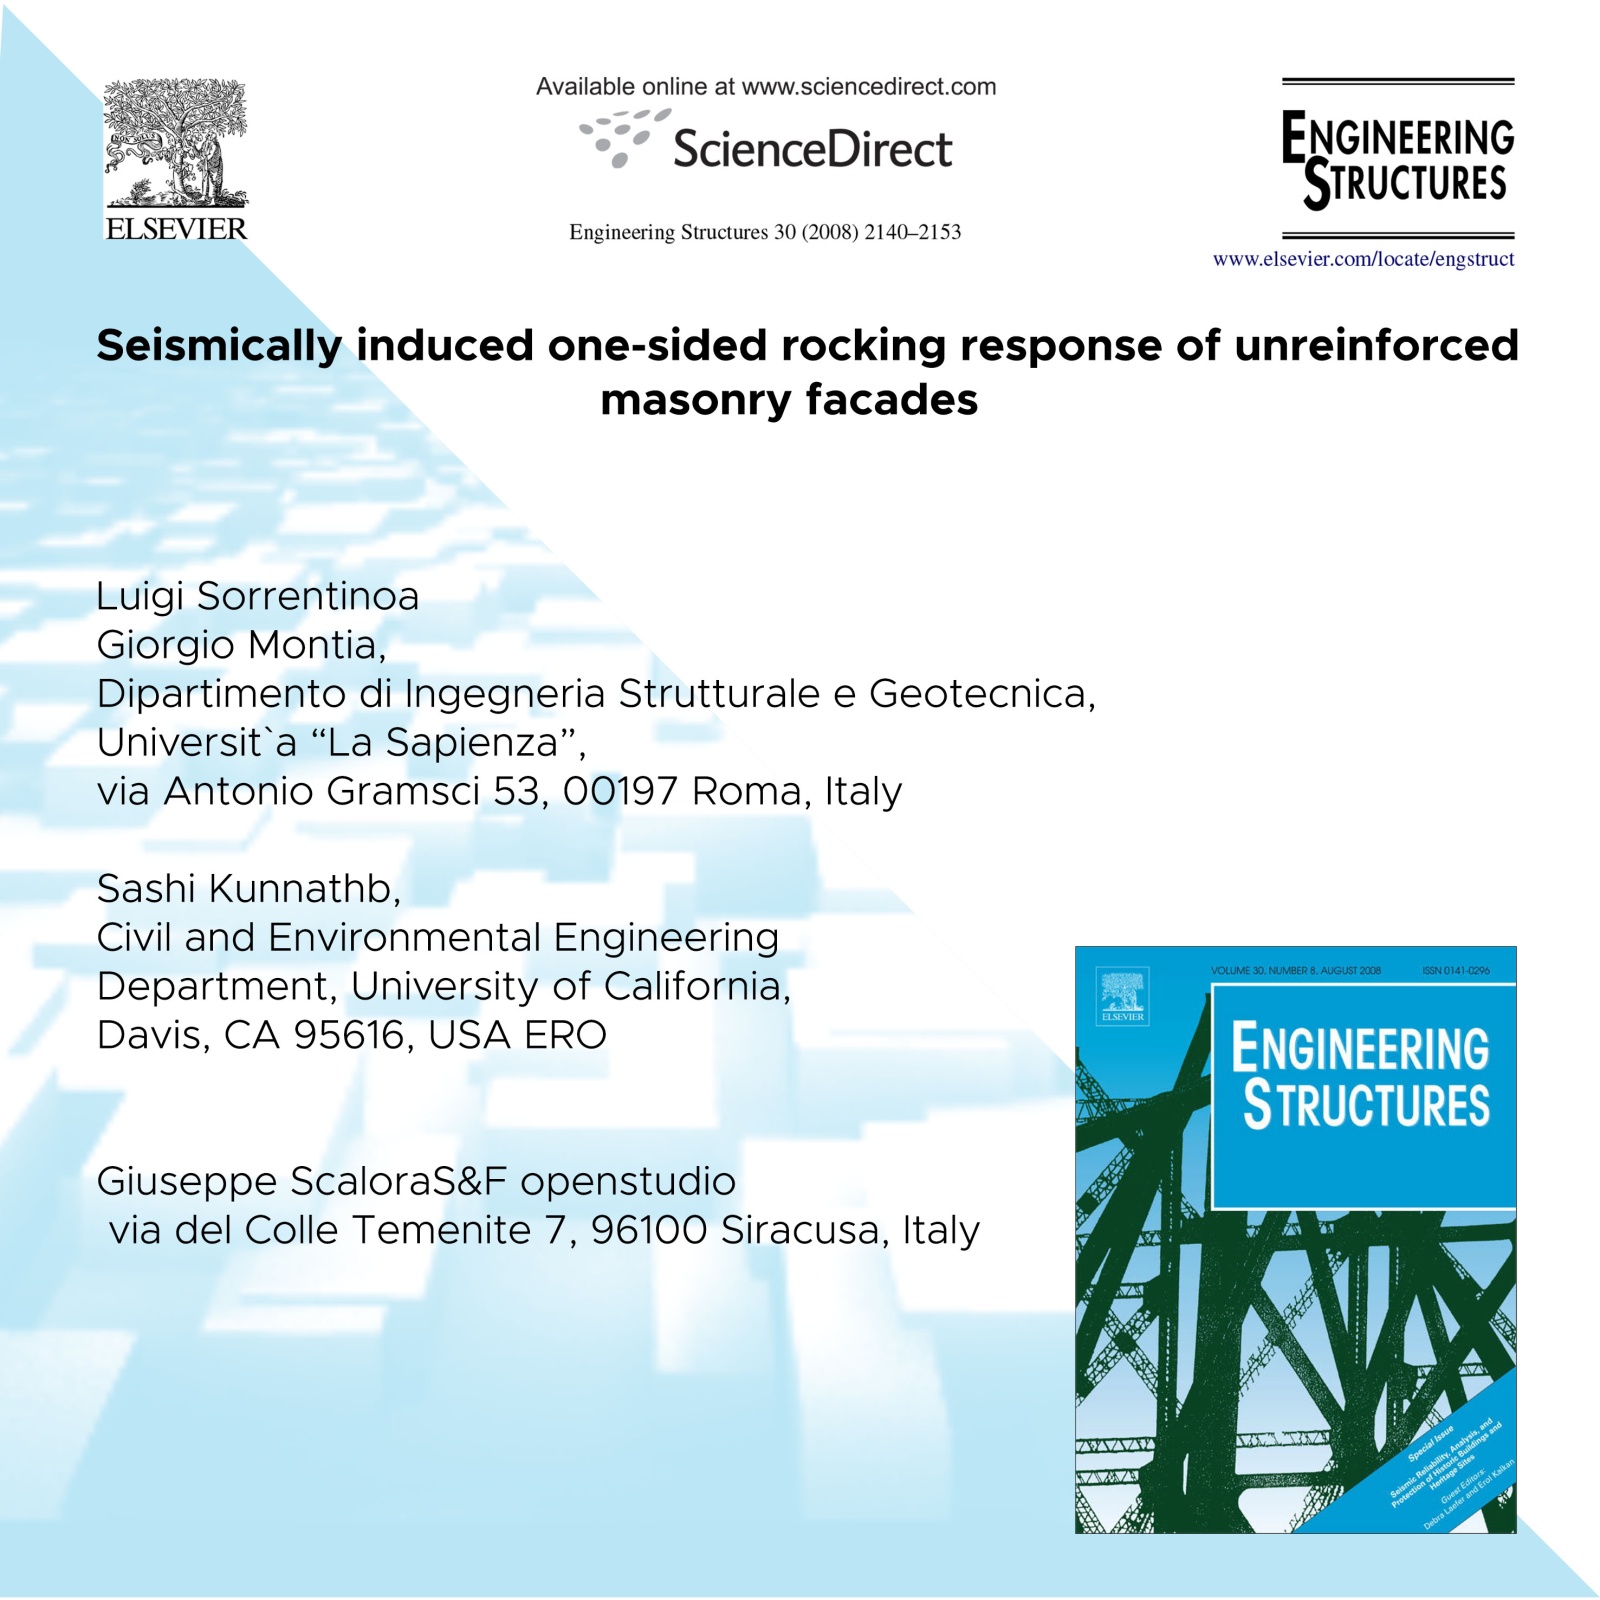 2014 - Seismically induced one-sided rocking response of unreinforcedmasonry fac¸ades